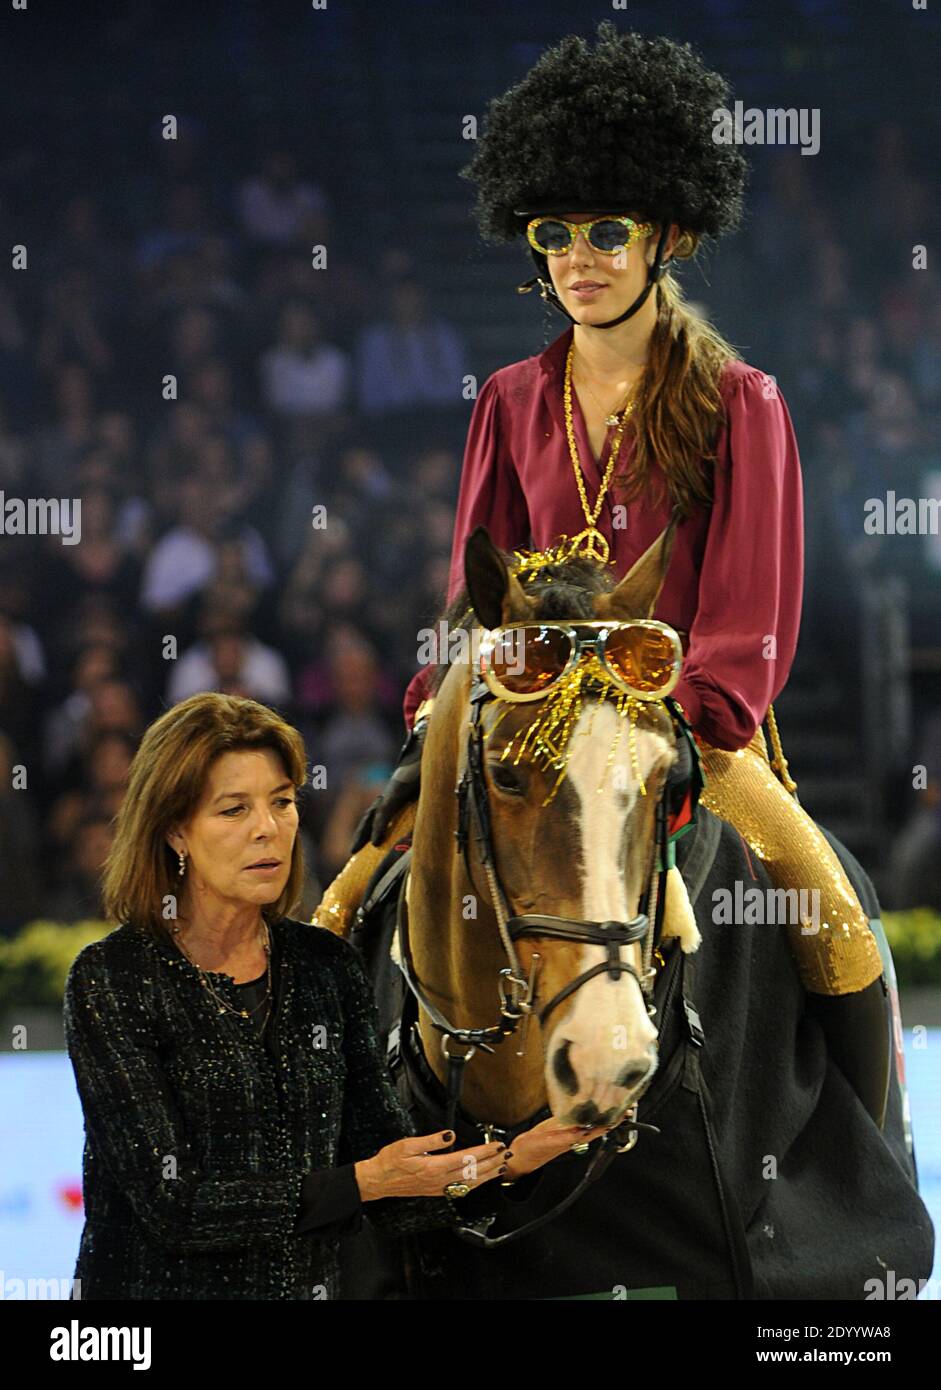 Daughter of Princess Caroline of Monaco Charlotte Casiraghi gave birth to a baby boy she had with actor and comedian Gad Elmaleh at the Princess Grace Hospital in Monaco on Tuesday it was reported on Wednesday December 18. File photo : Caroline of Hanover and daughter Charlotte Casaraghi participates to at the Amade price during the Gucci Masters International Jumping Competition in Villepinte, North of Paris, France on December 3, 2011. Photo by Giancarlo Gorassini/ABACAPRESS.COM Stock Photo